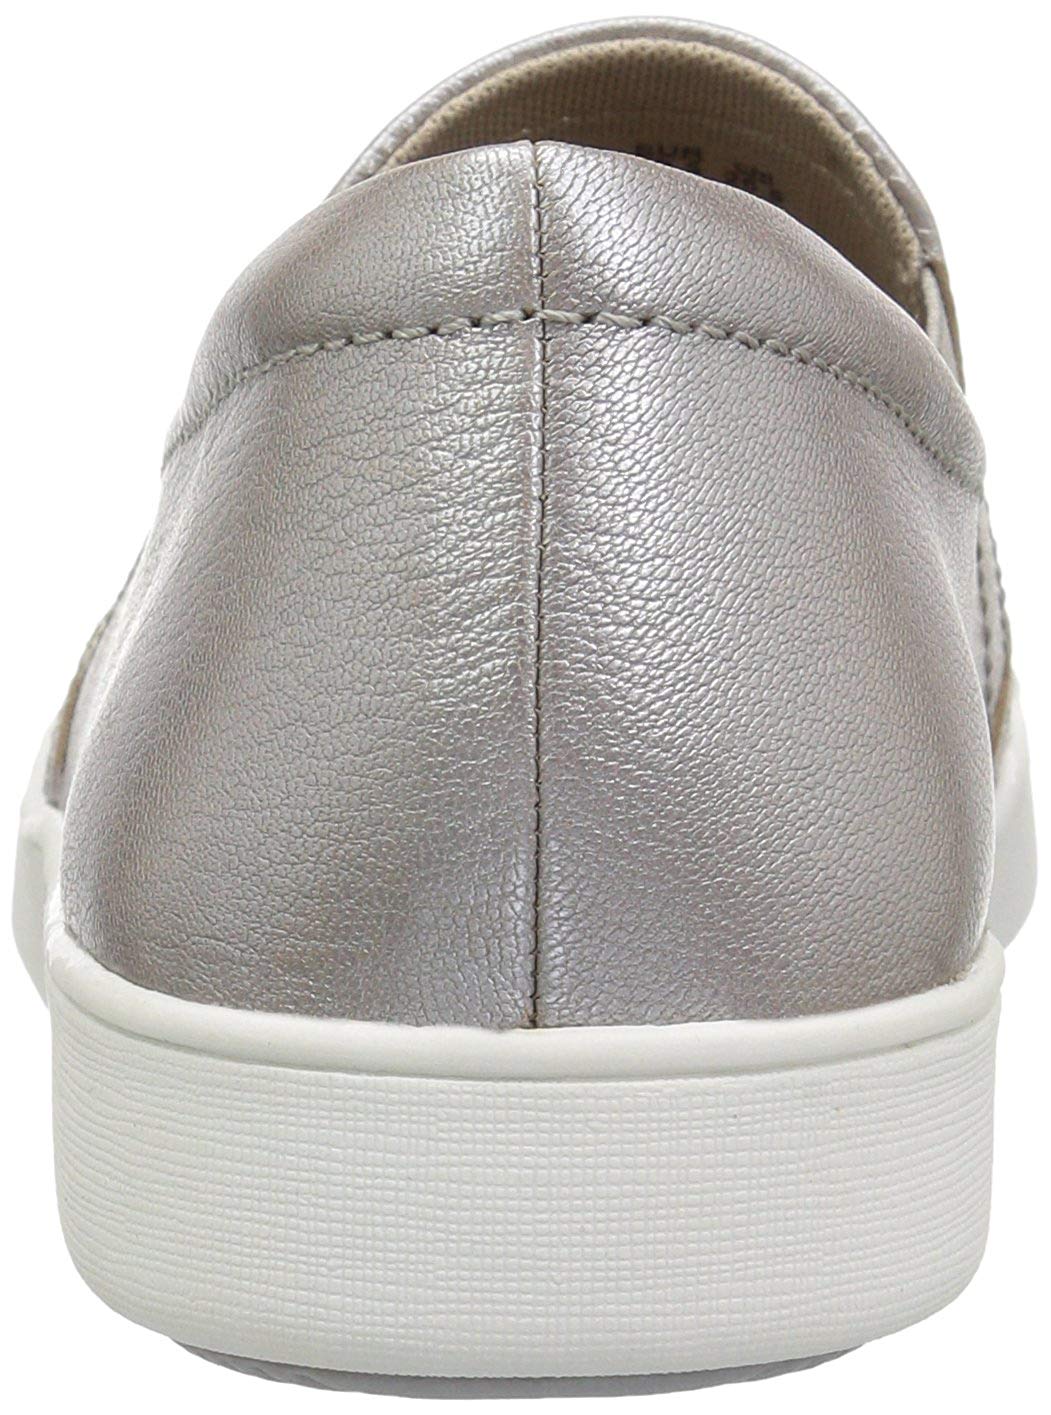 Naturalizer Womens Marianne Fabric Round Toe Loafers, Silver, Size 8.0 ...